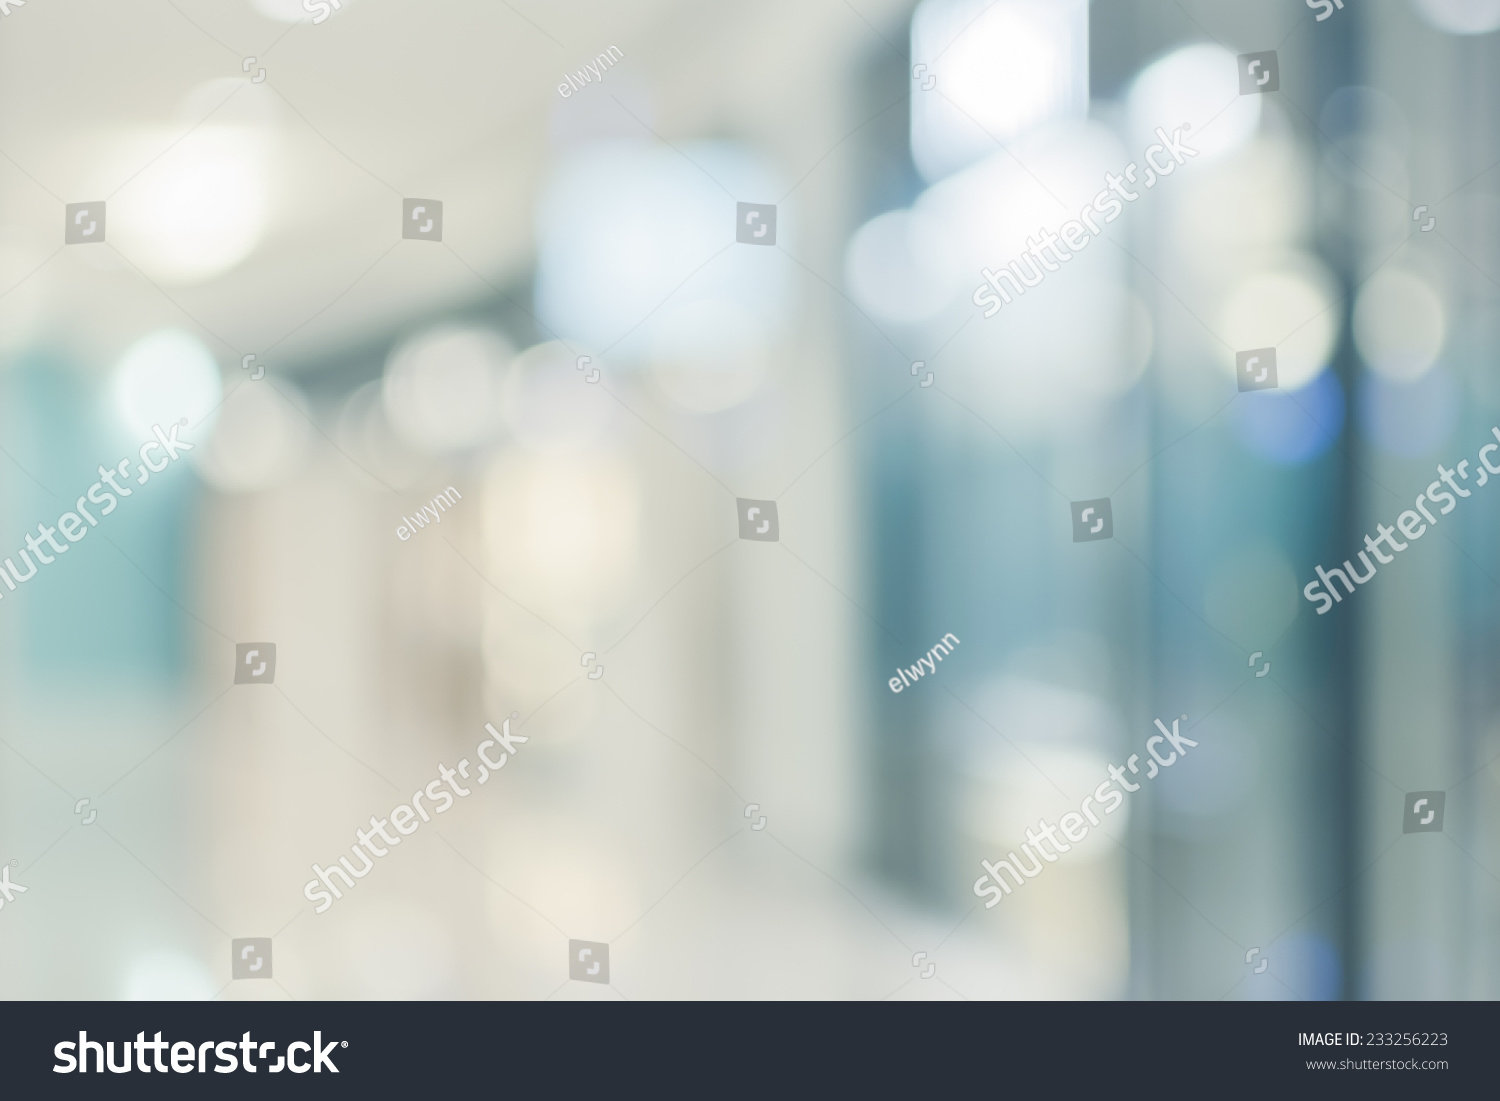 Abstract background of shopping mall, shallow depth of focus. #233256223